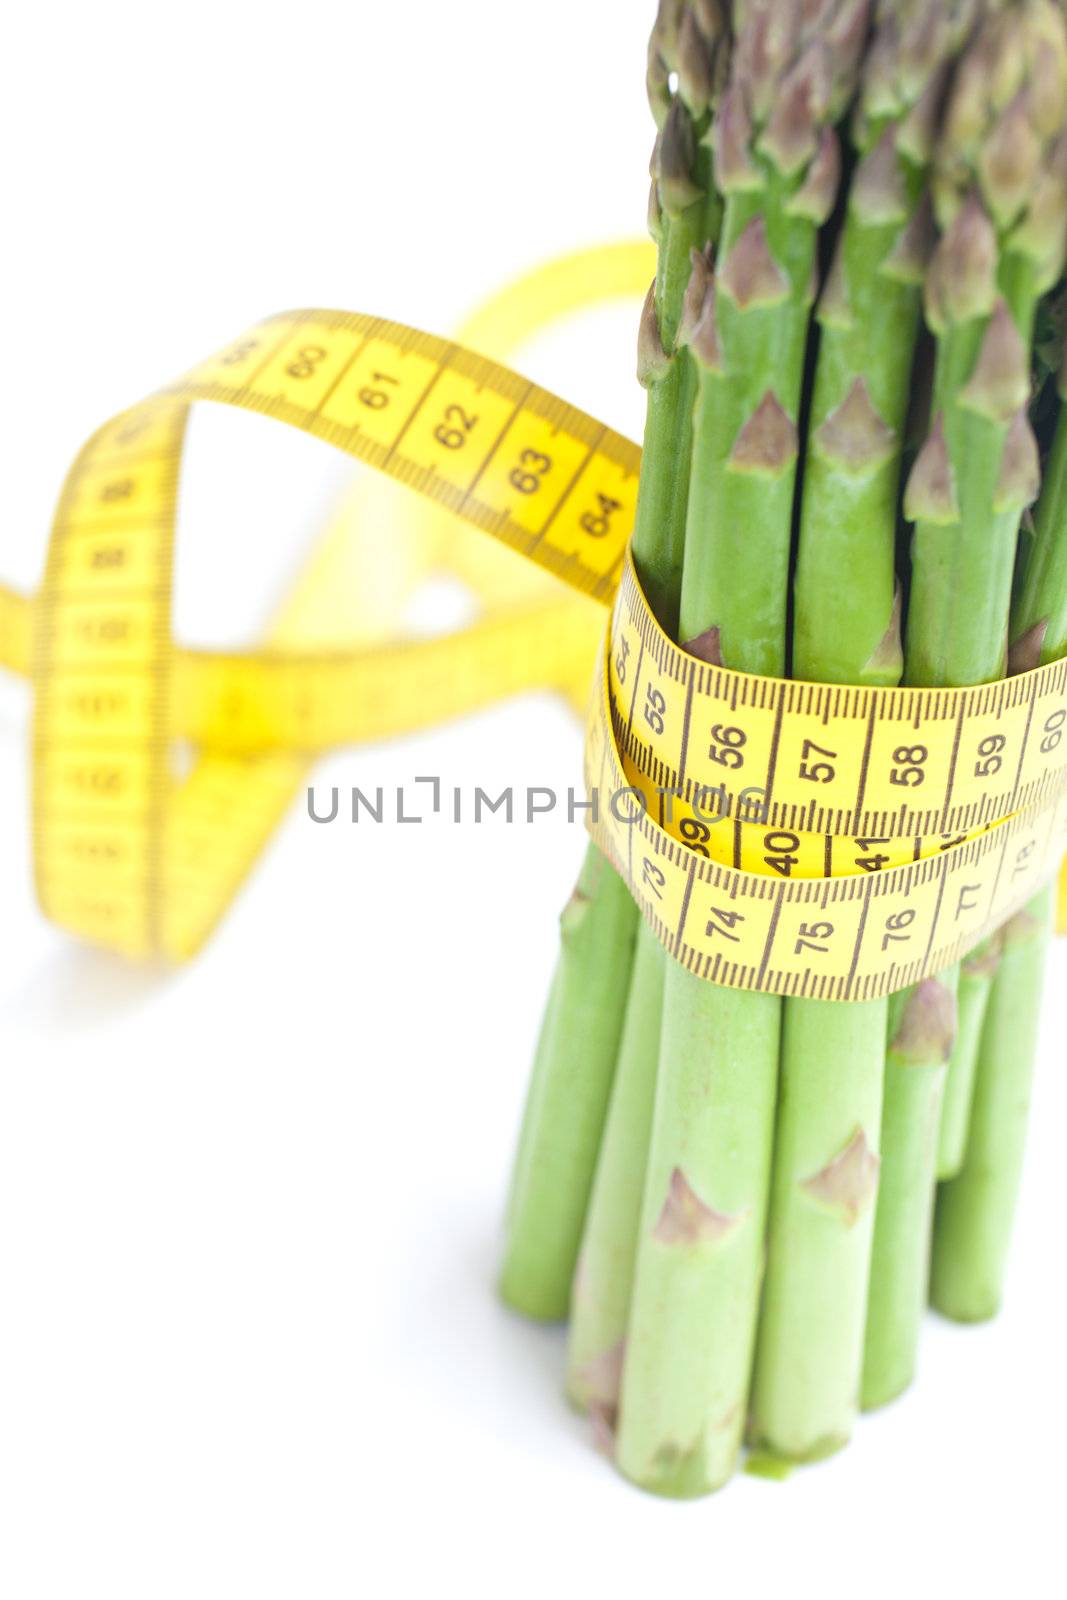 bunch of asparagus tied with measuring tape isolated on white